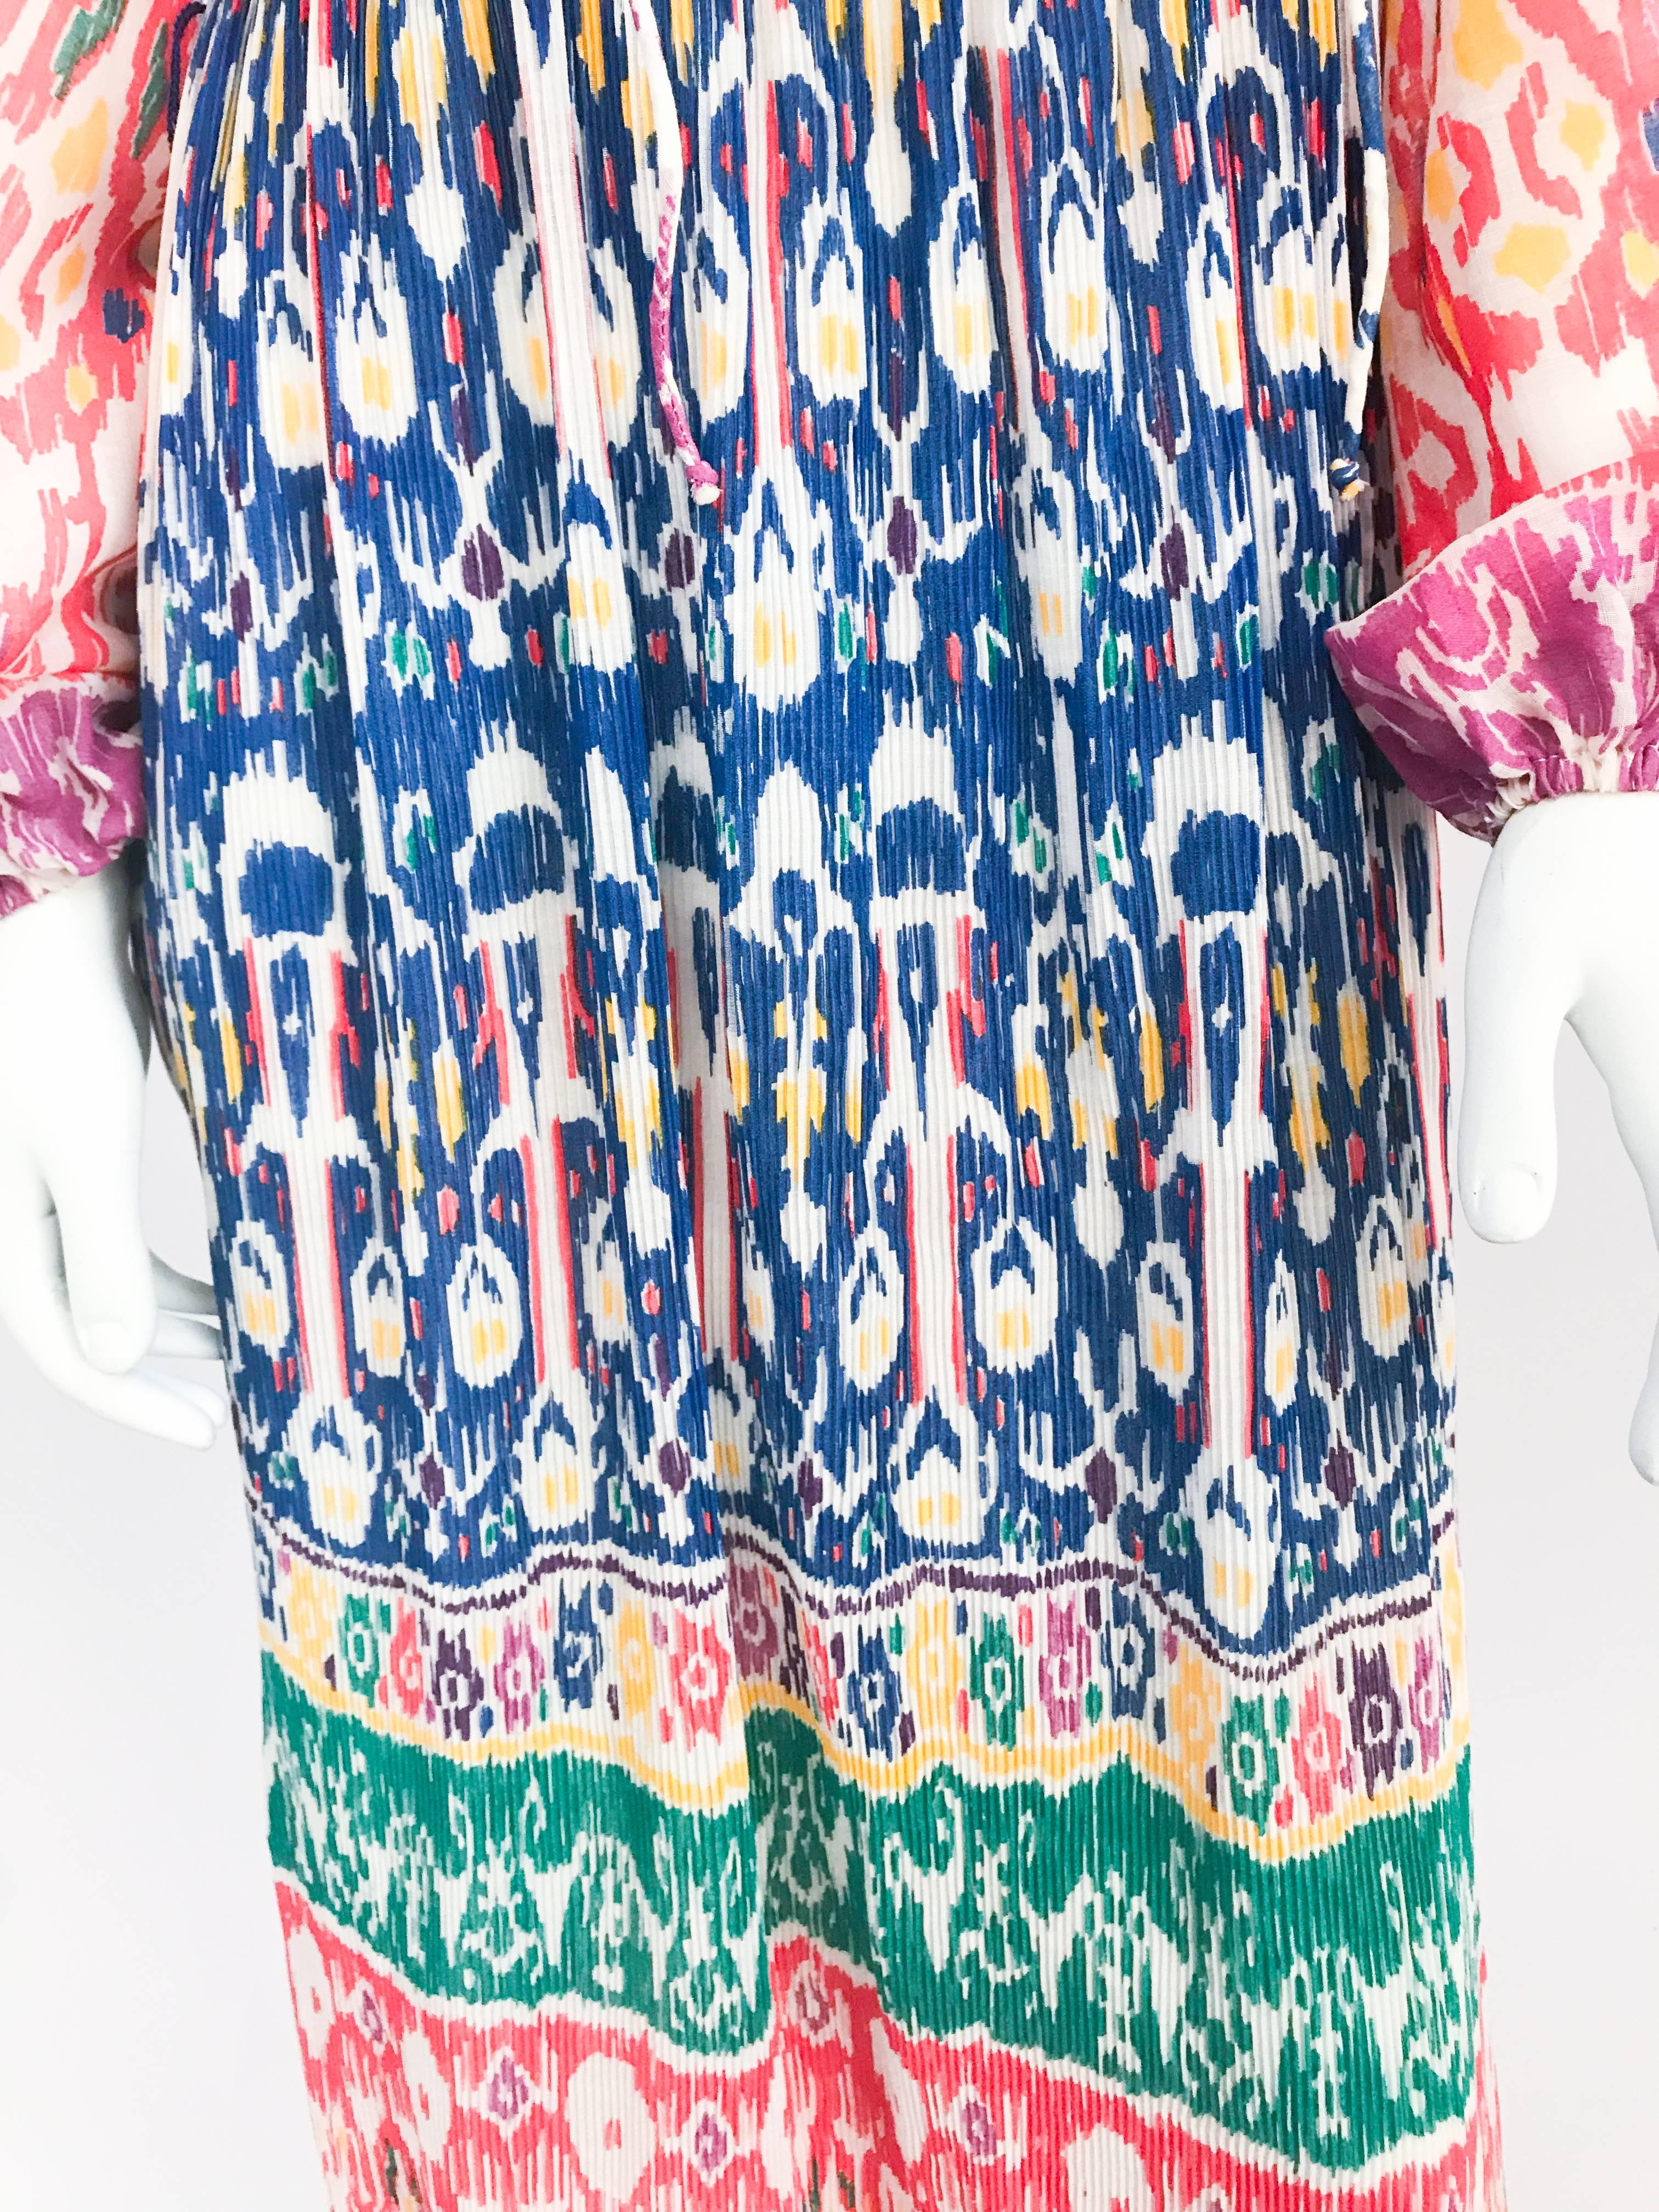 1970s I. Magnin Pleated Impressionist Printed Day Dress. Multi-colored day dress with micro-pleated skirt, bell sleeves, v-shaped neck line with tie closure, fully lined, and impressionist print.